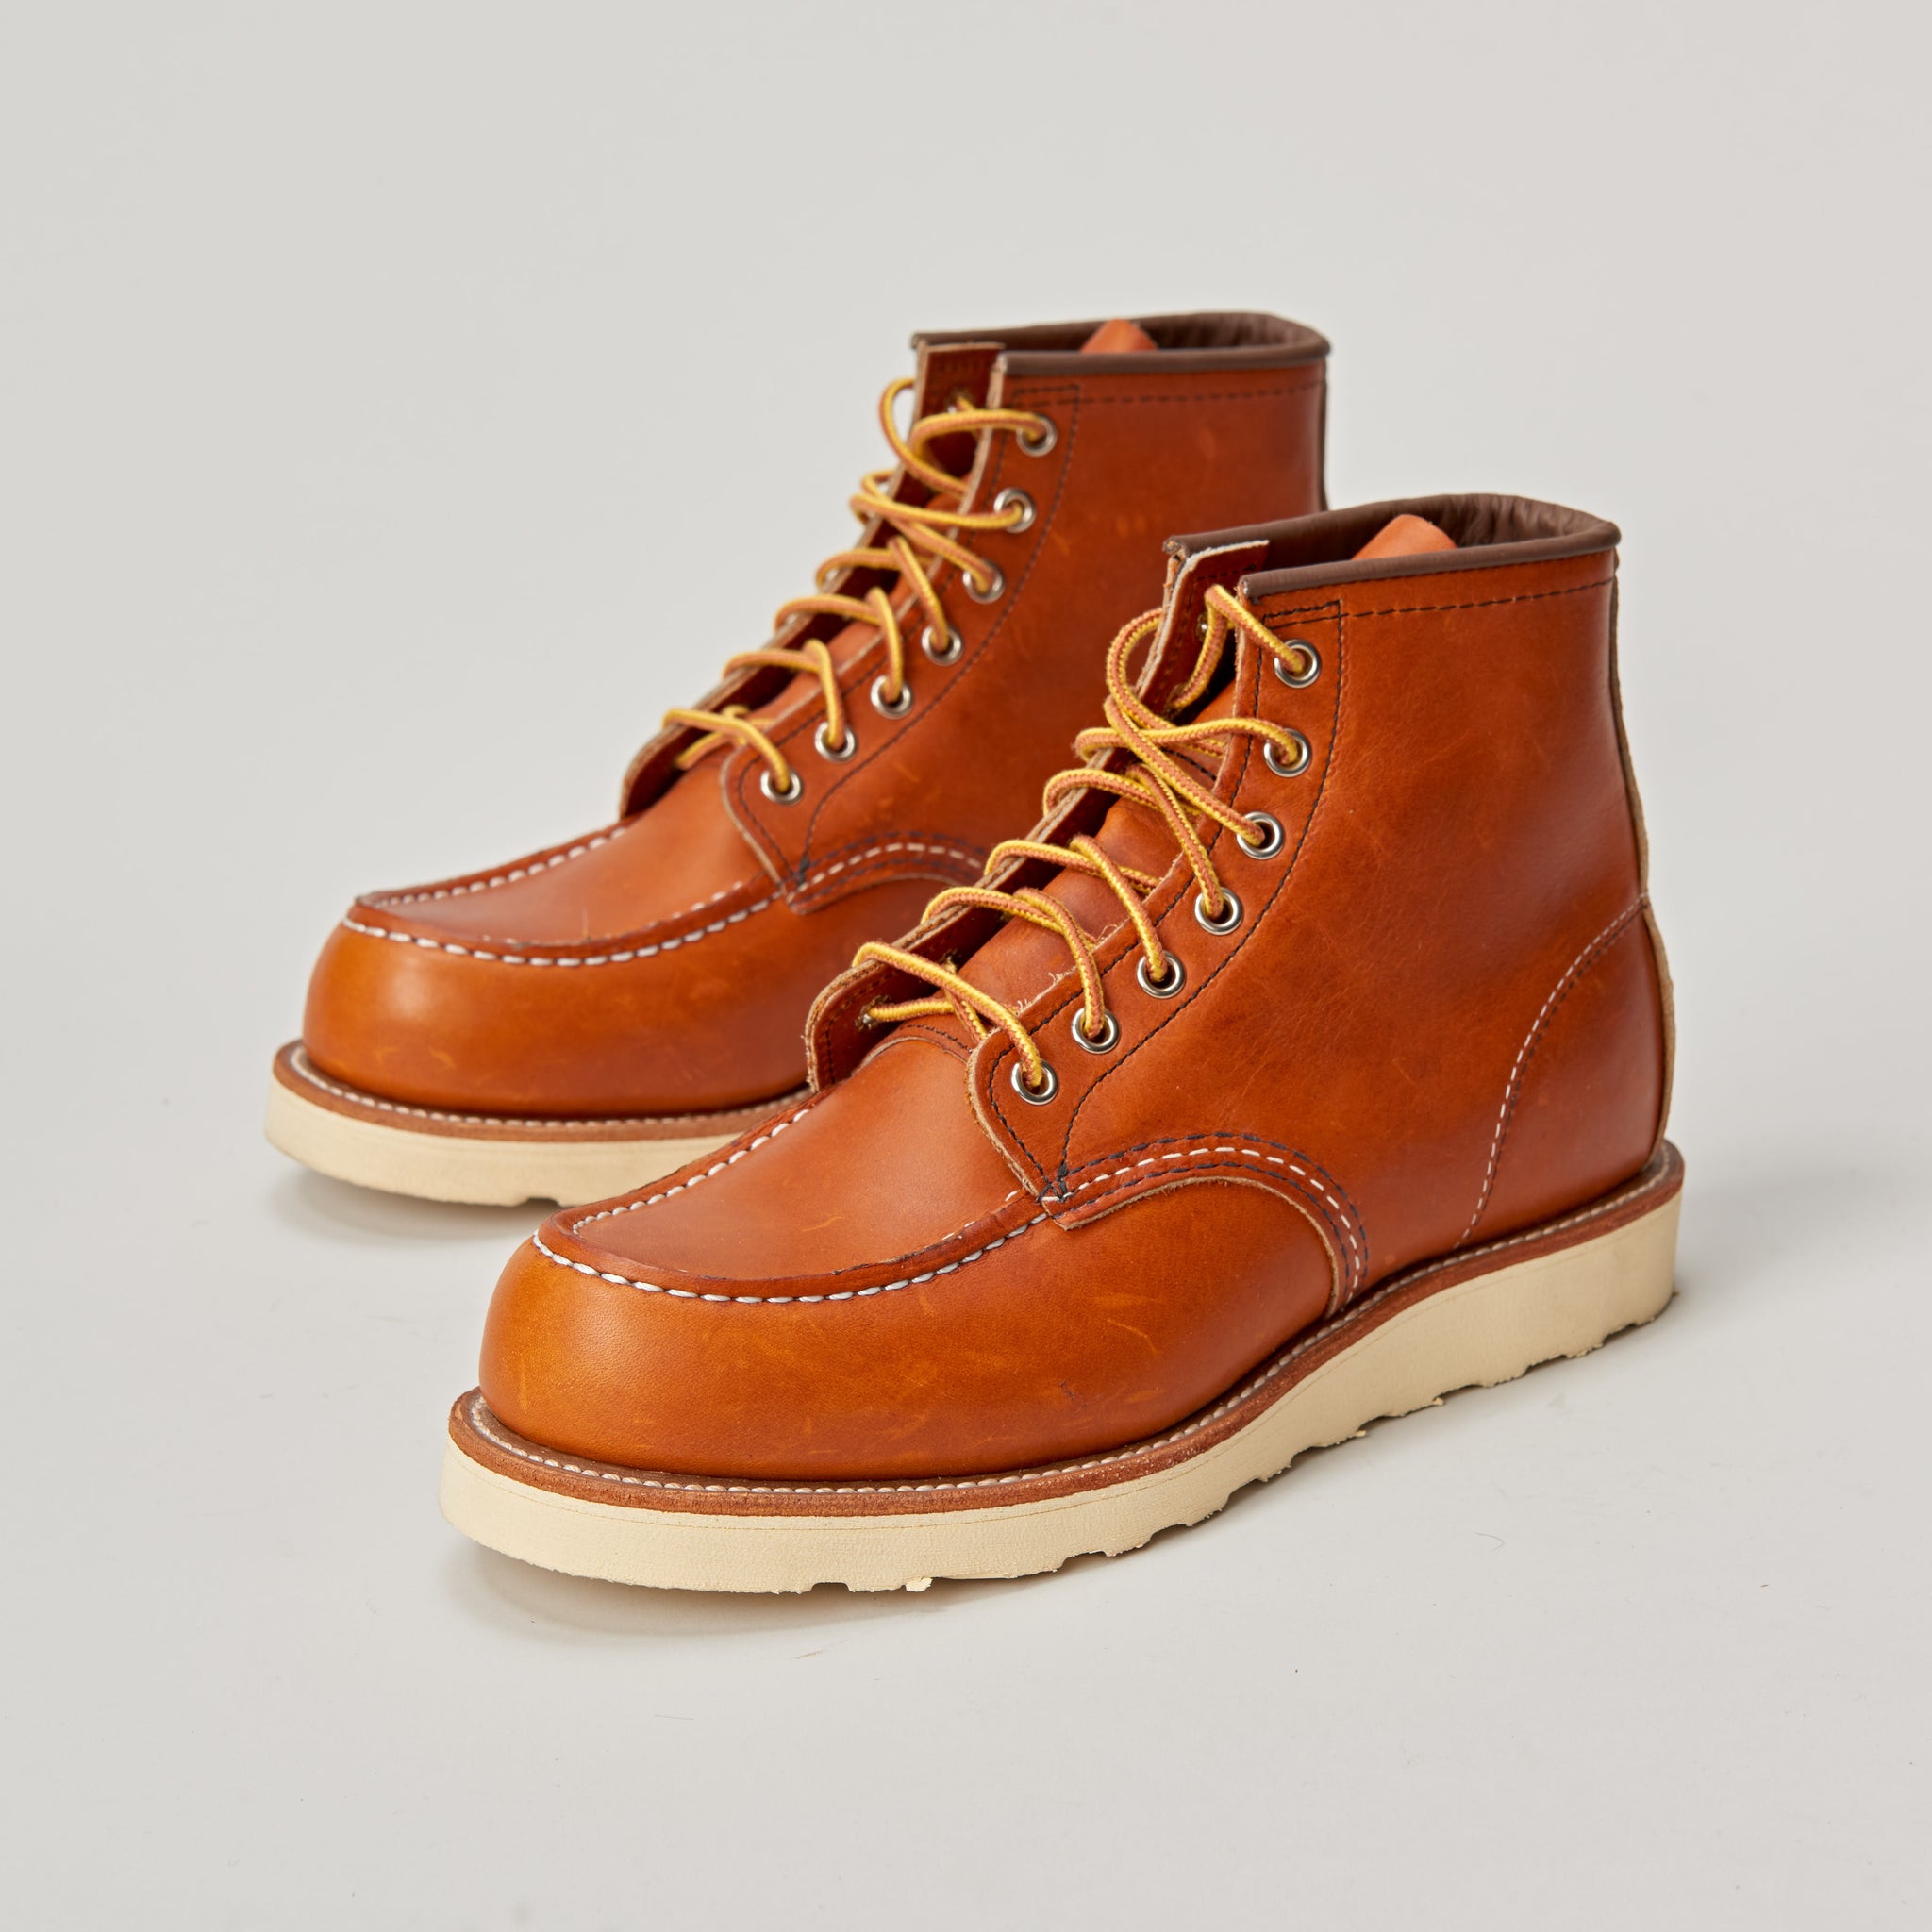 RED WING 875 CLASSIC MOC TOE BOOT 